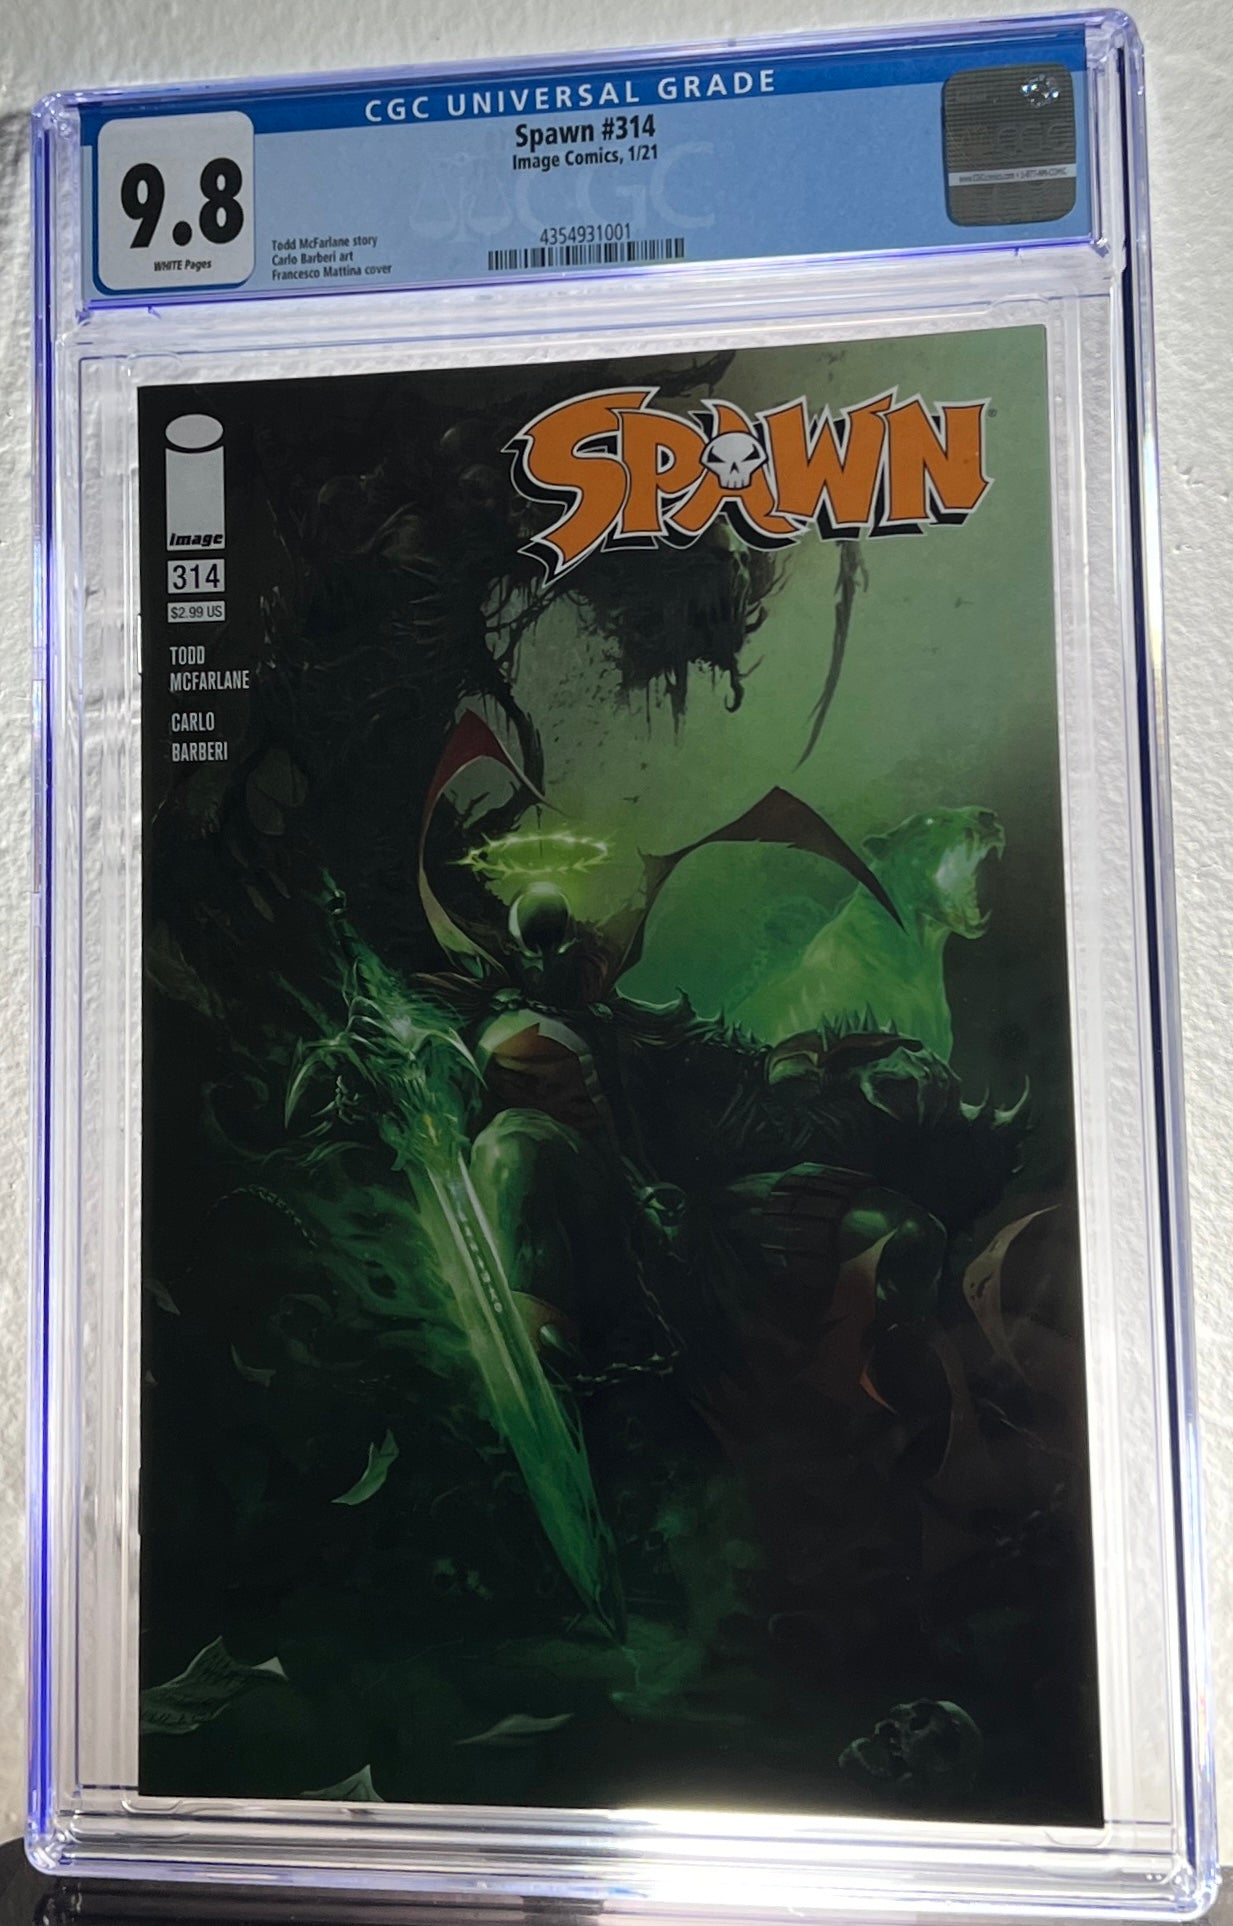 CGC 9.8 Graded and slabbed Spawn #314